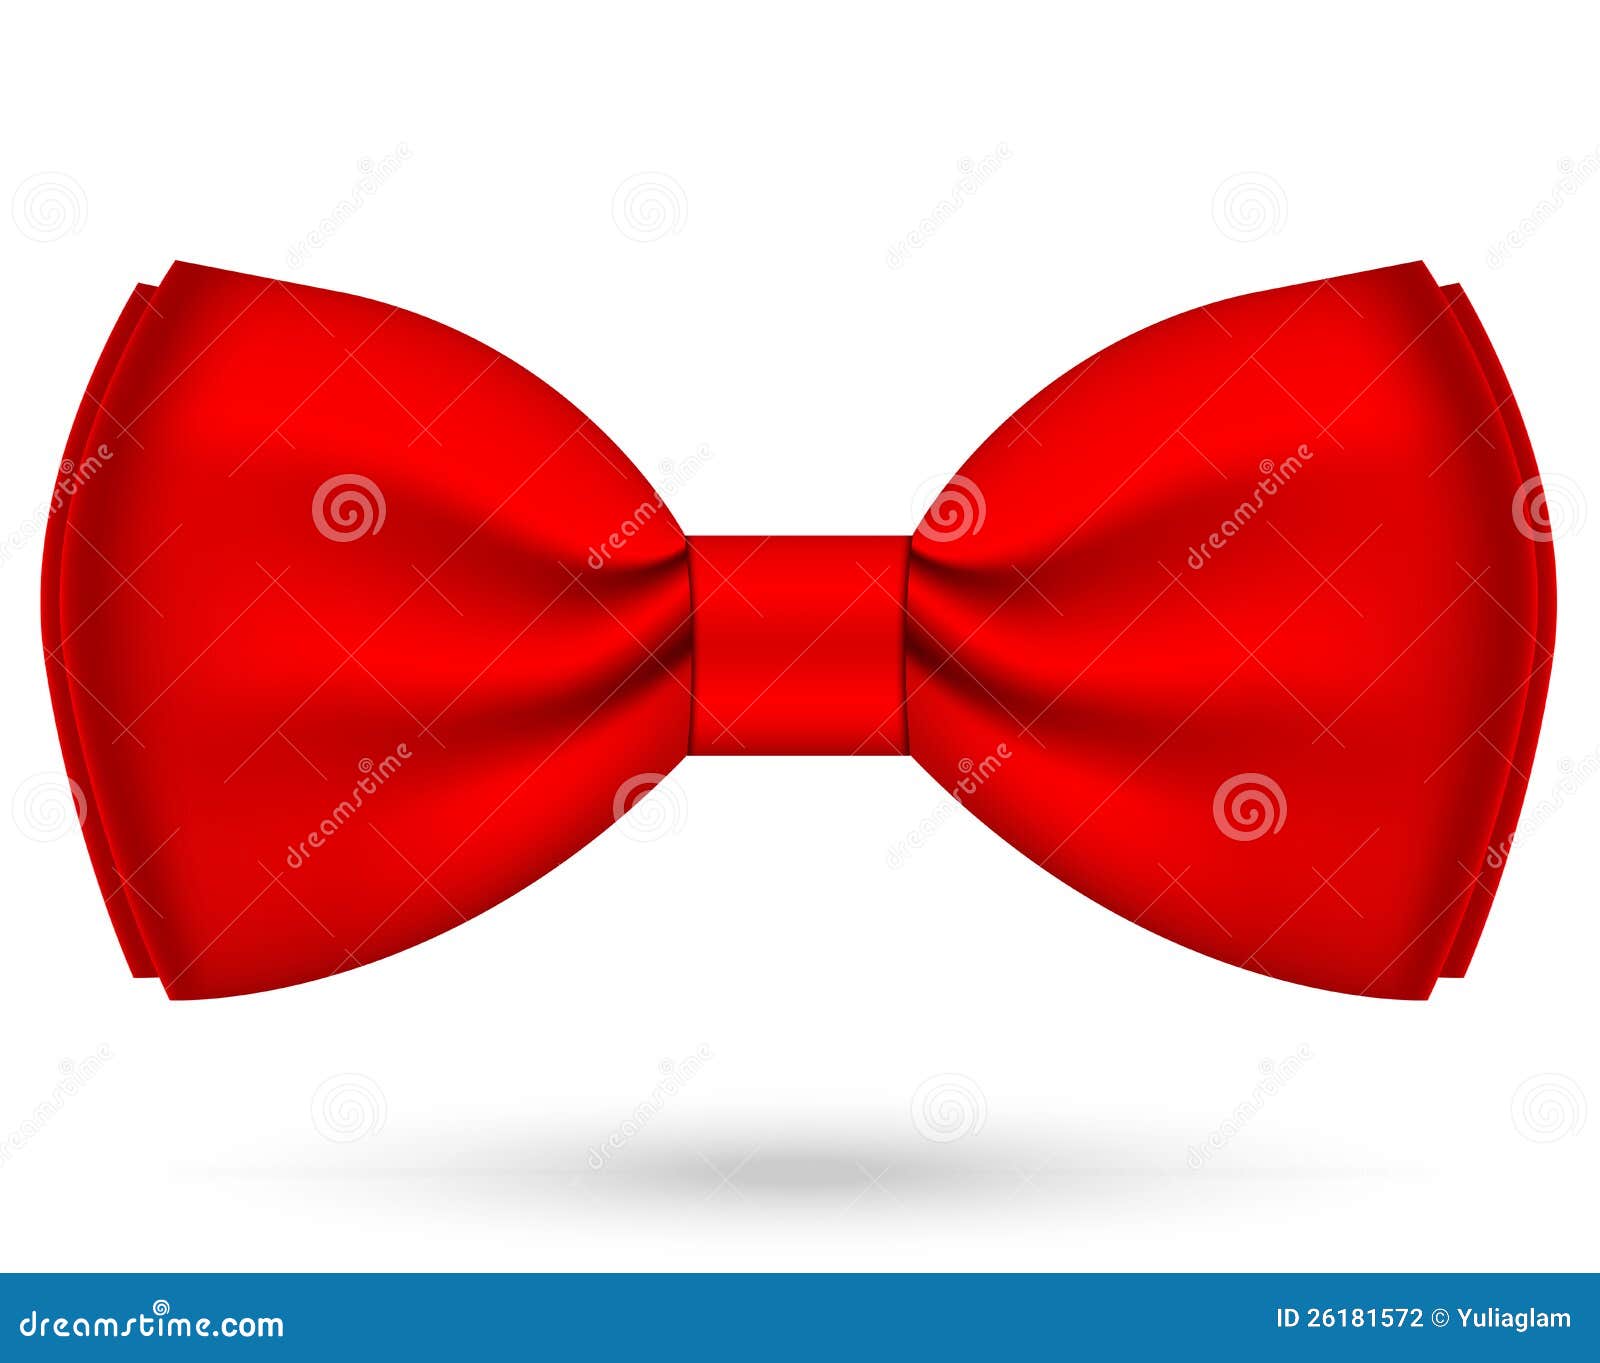 Red Tie Stock Vector Illustration and Royalty Free Red Tie Clipart